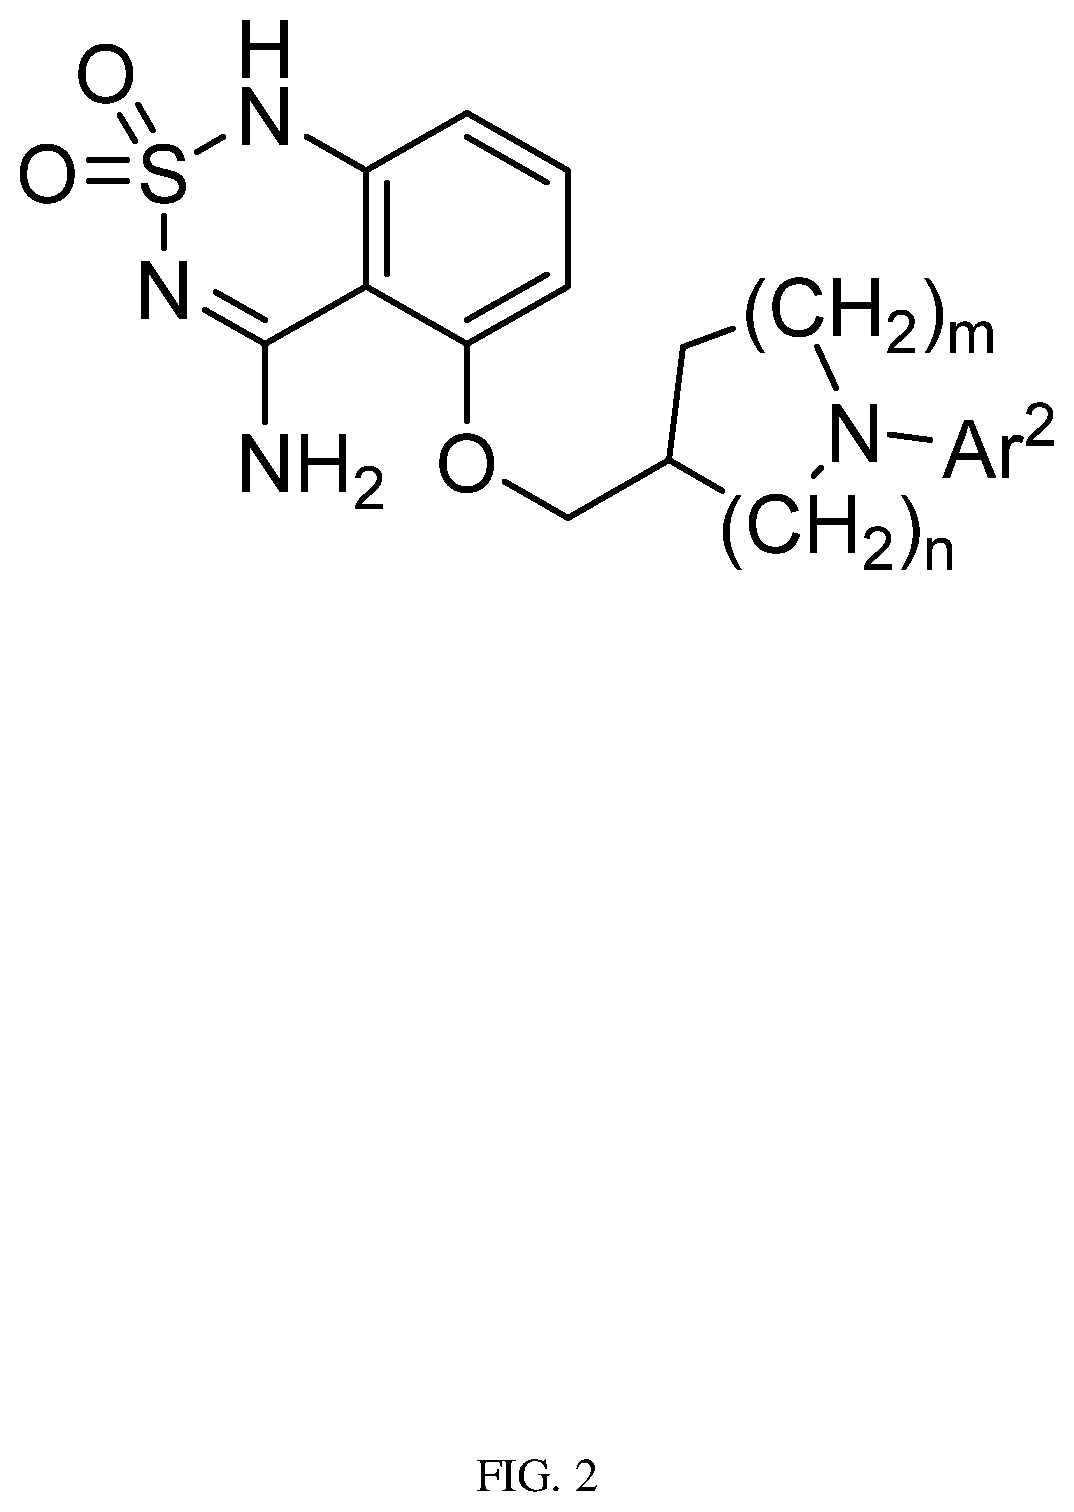 5-SUBSTITUTED 4-AMINO-1H-BENZO[c][1,2,6]THIADIAZINE 2,2-DIOXIDES  AND FORMULATIONS AND USES THEREOF